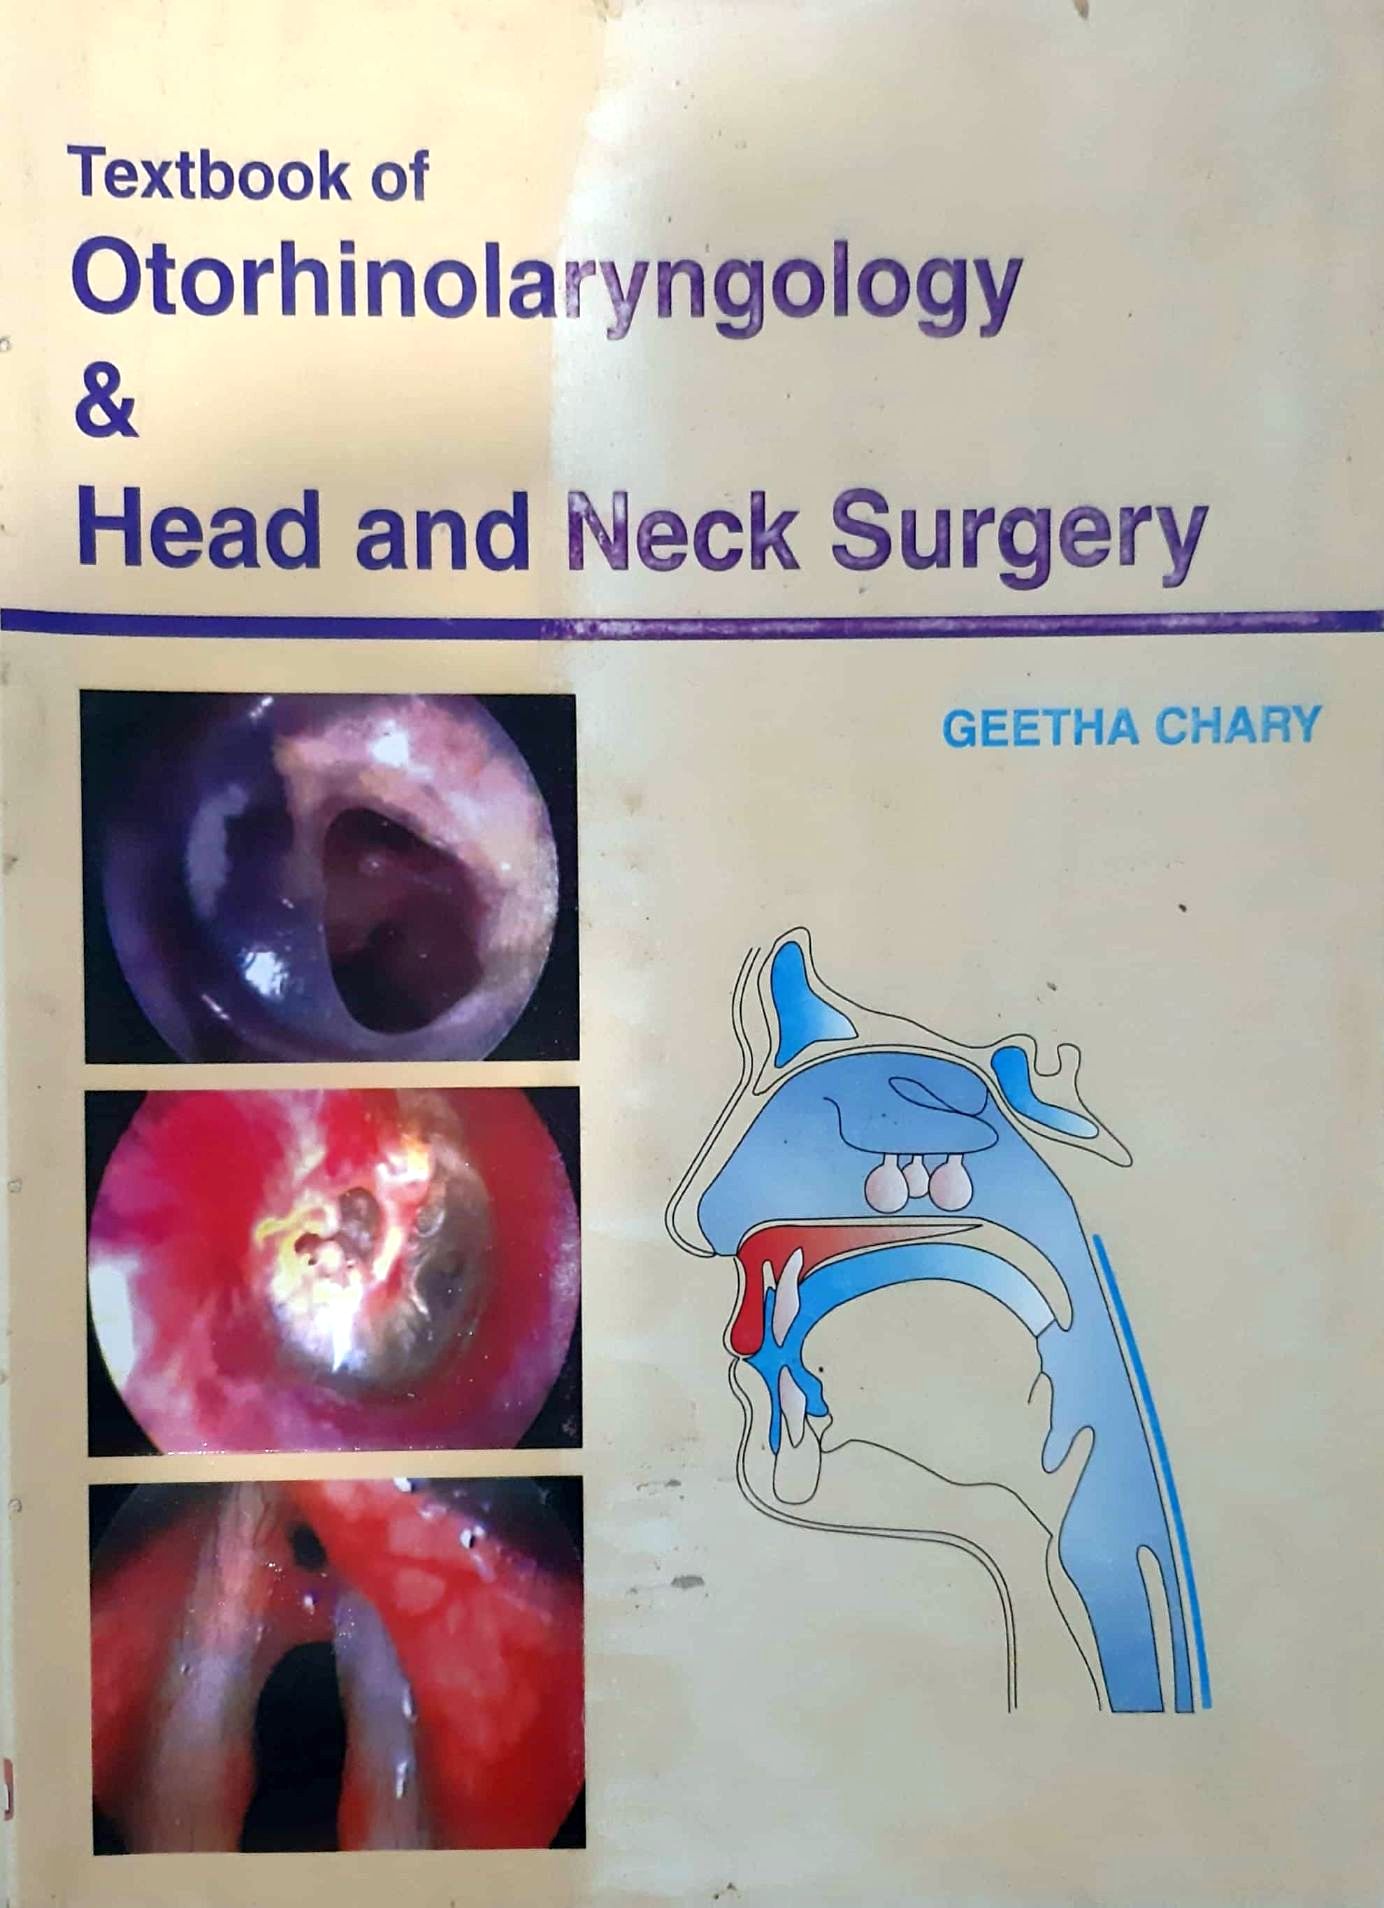 

surgical-sciences//textbook-of-otorhinolaryngology-head-and-neck-surgery-9789380316079